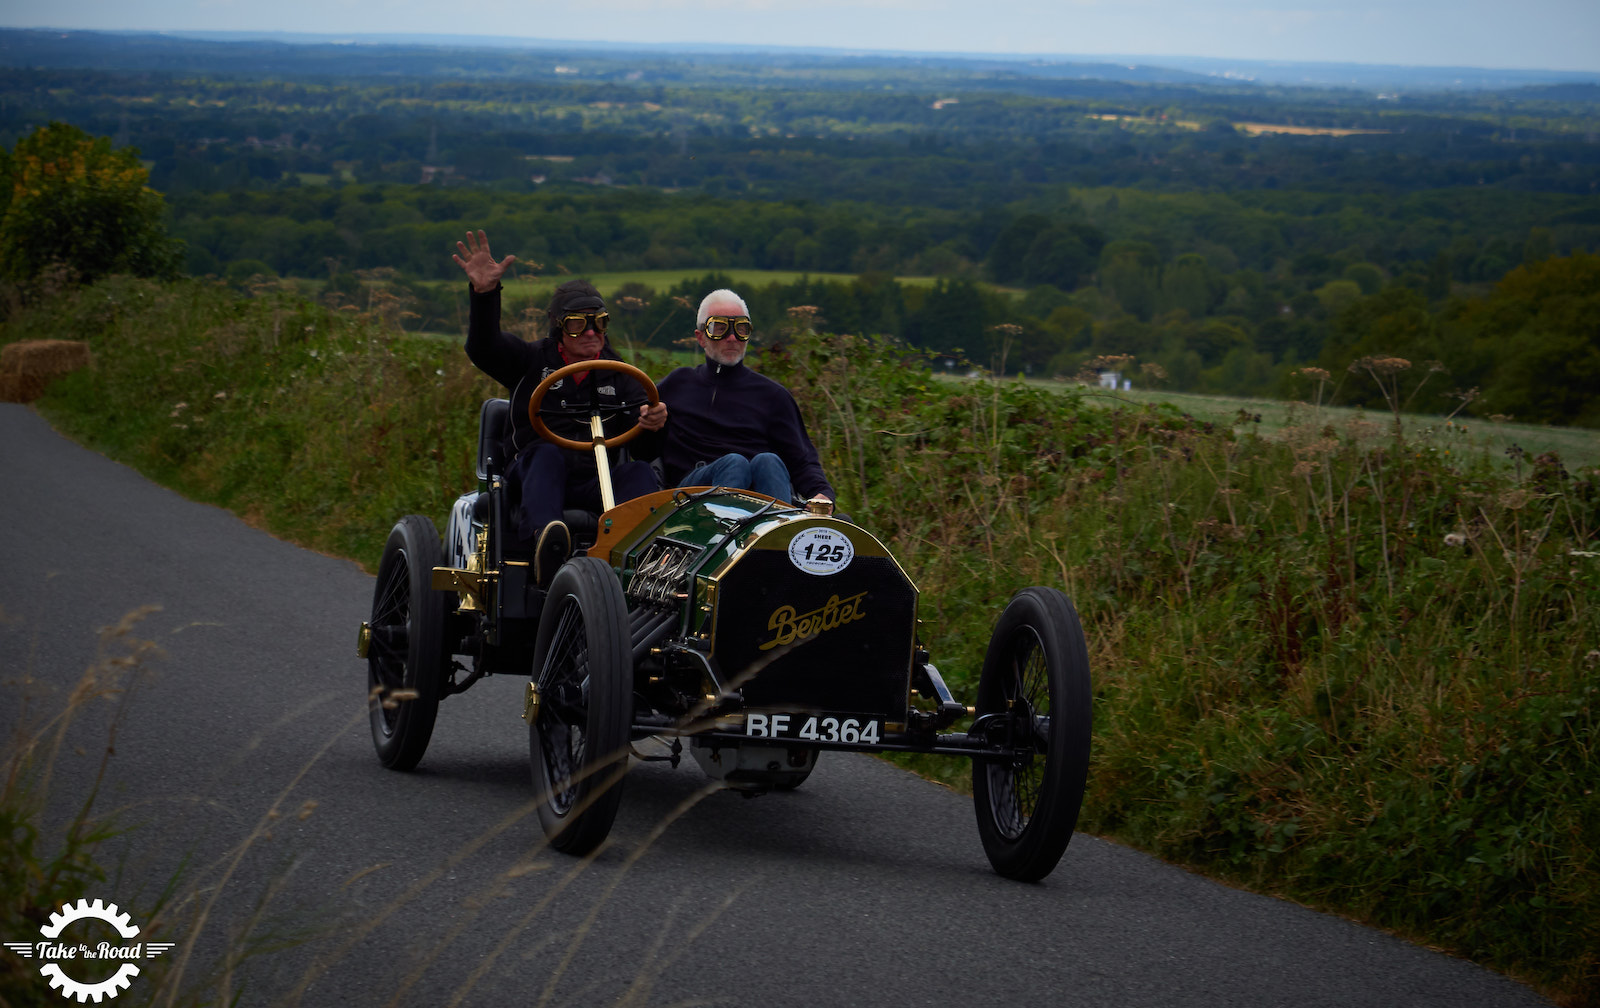 Shere Hill Climb 2019 reaches new heights